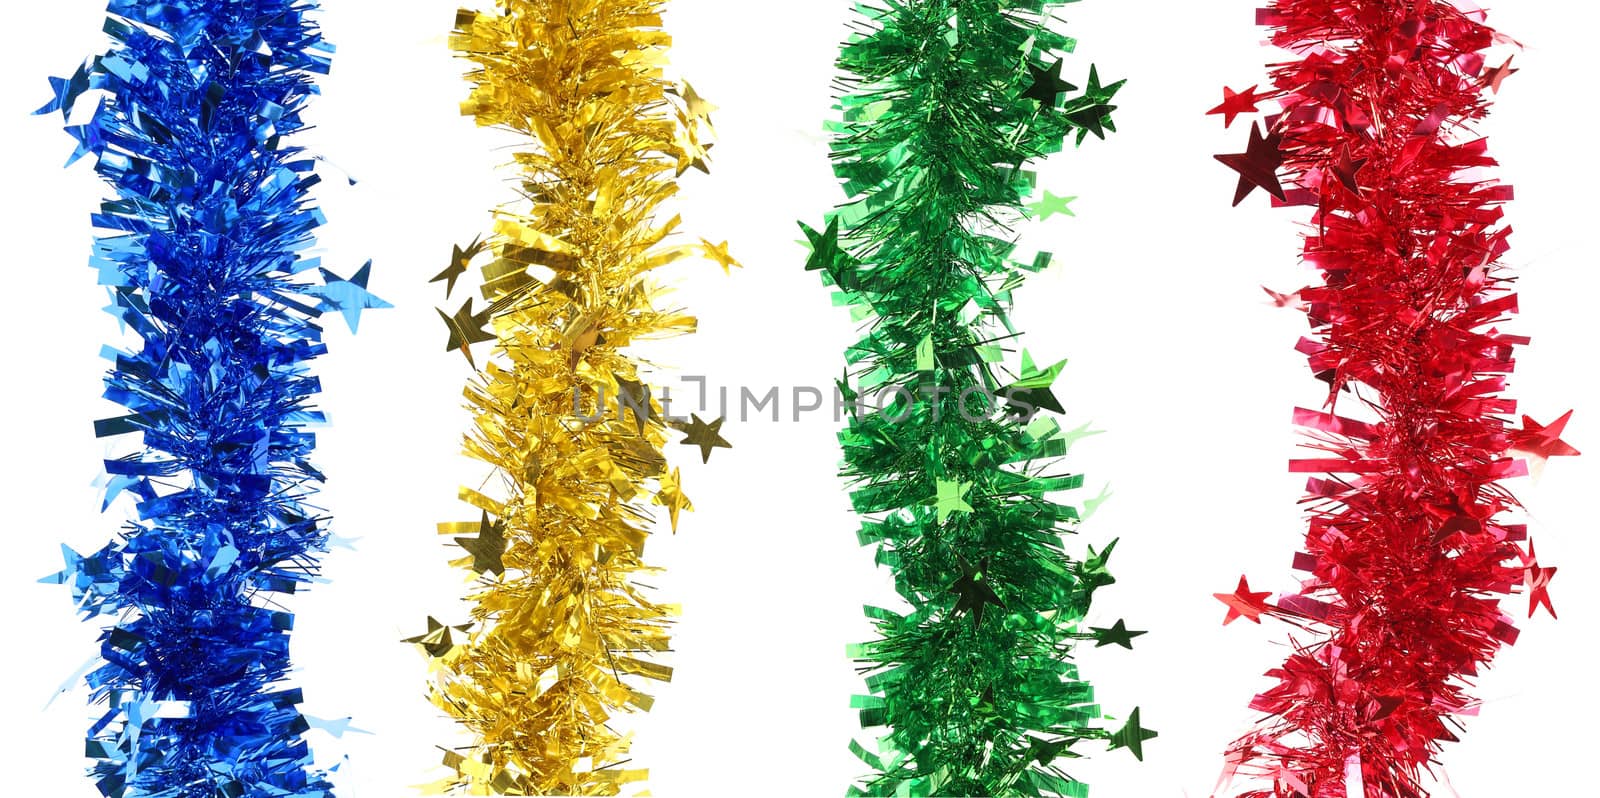 Christmas tinsels with stars. Veritcal row. Whole background.